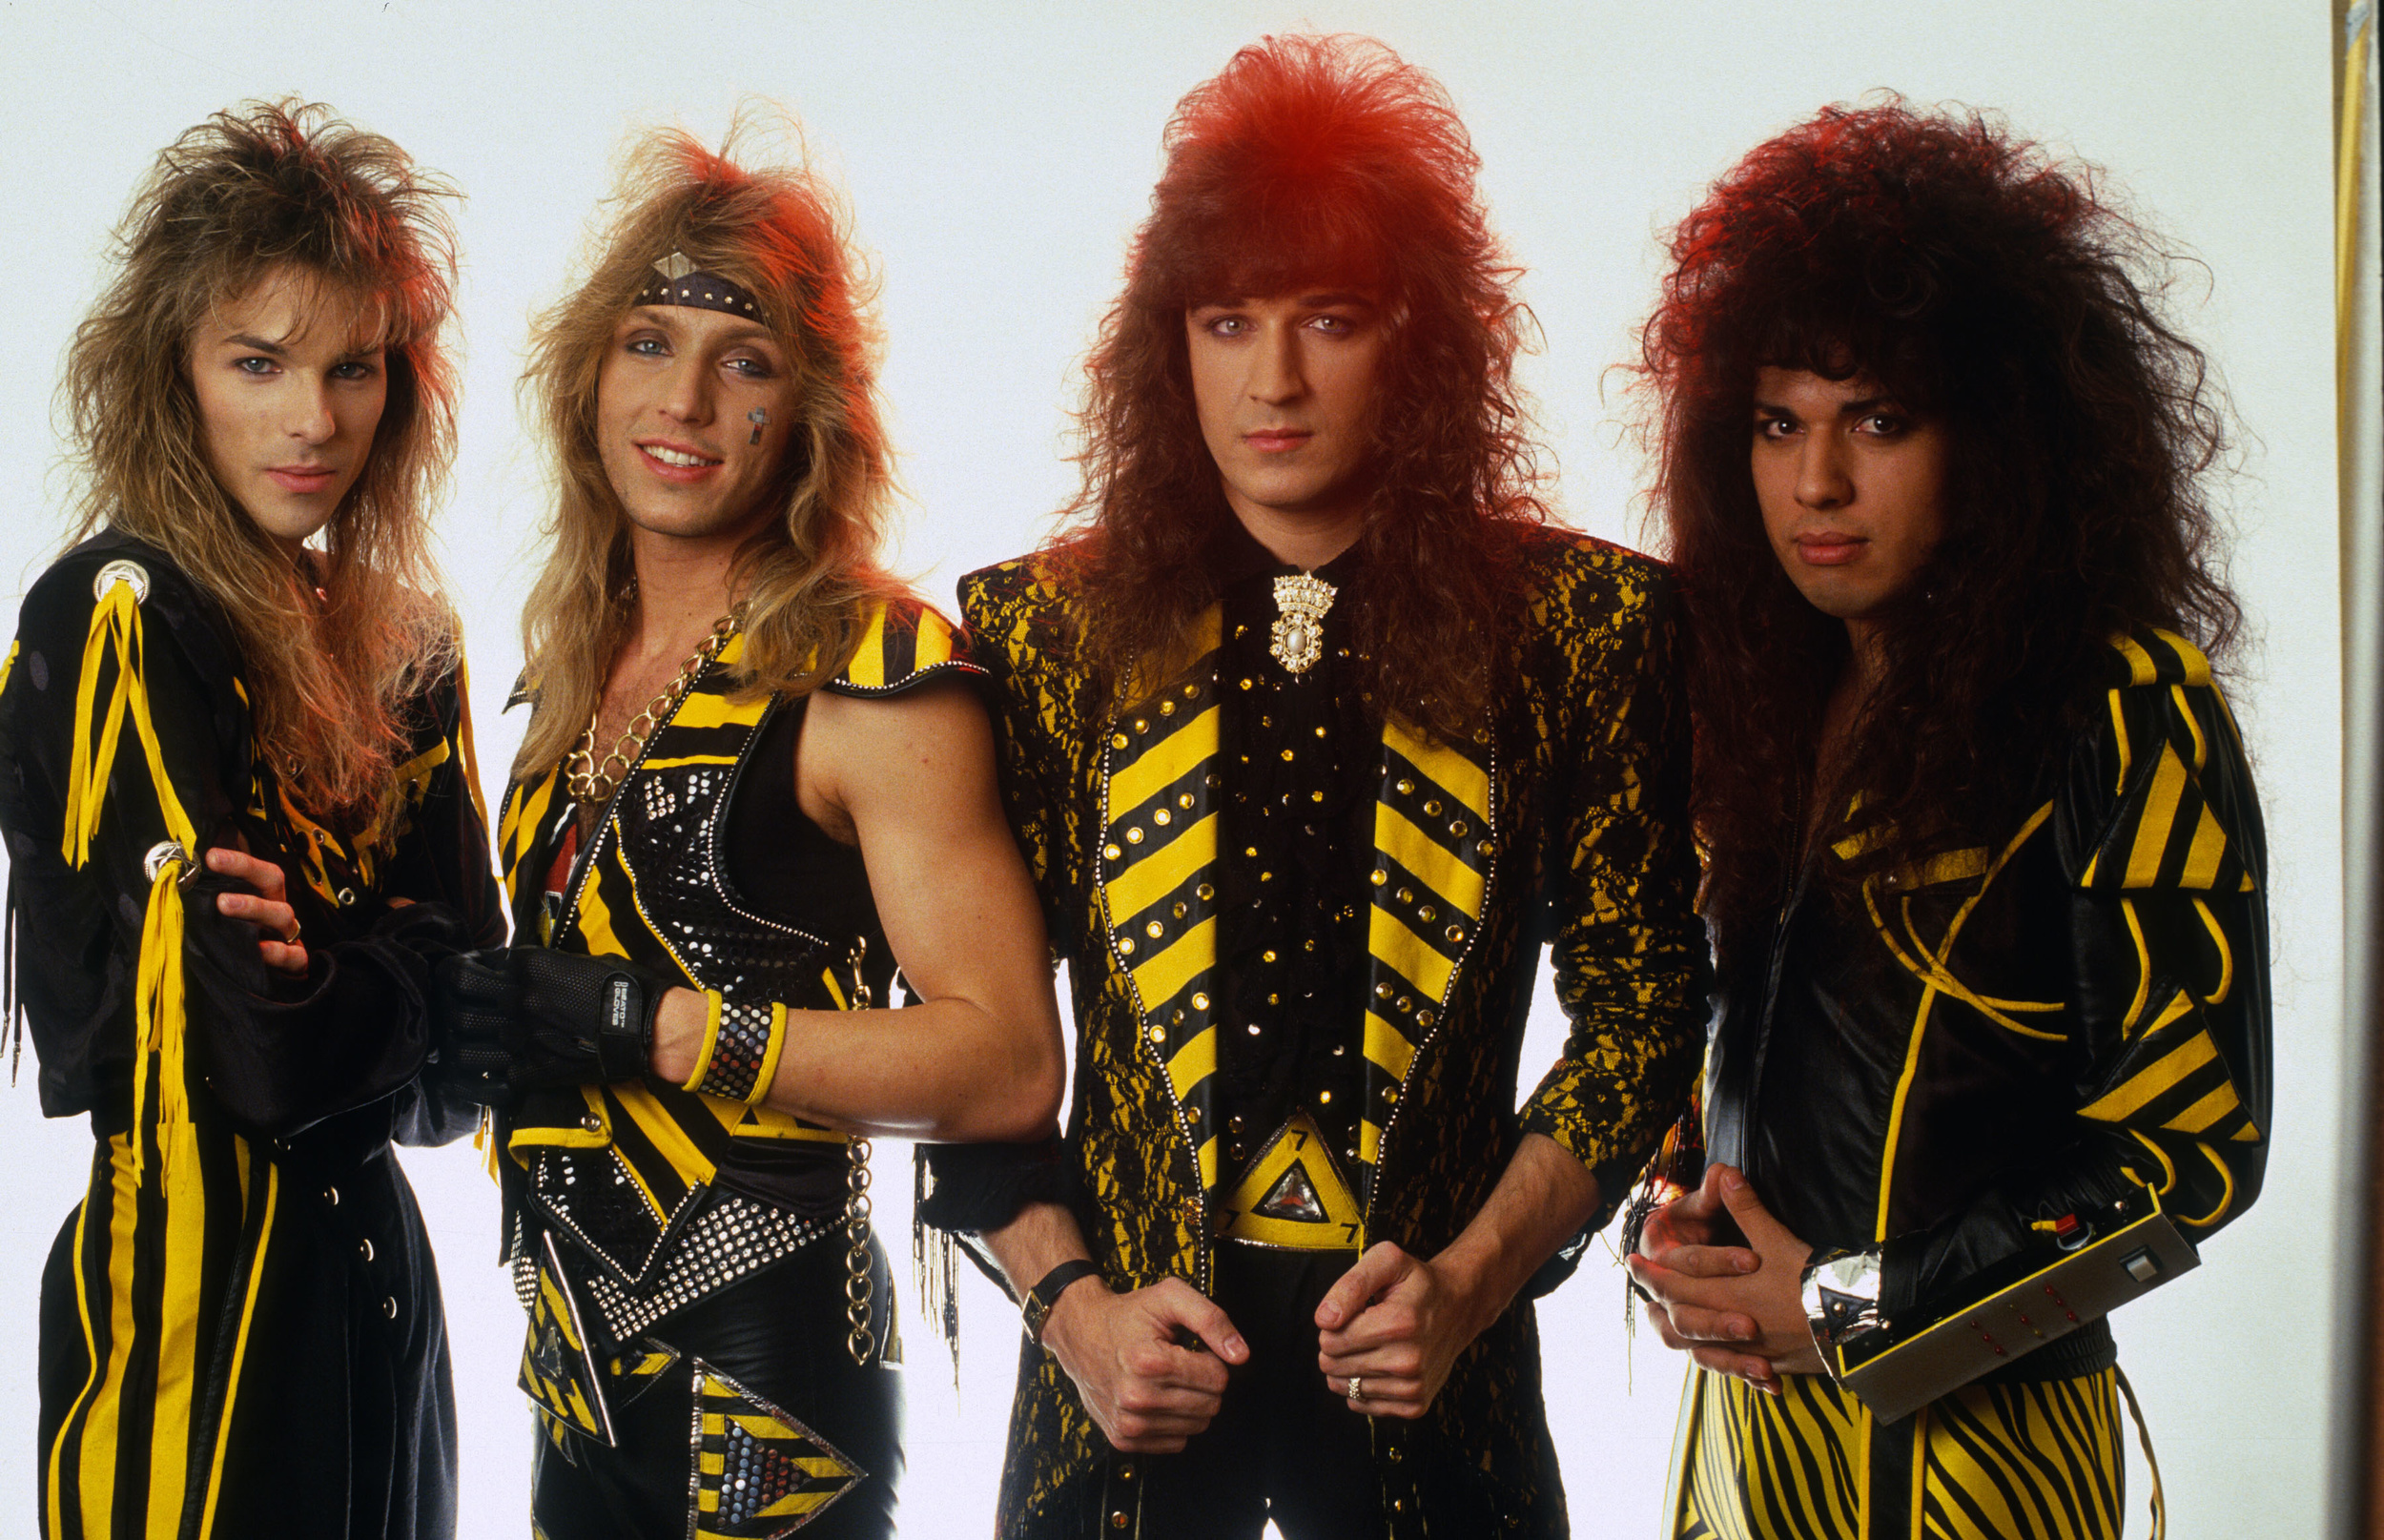 <p>It was the yellow-and-black attack. While satanic imagery has traditionally been a big part of the metal scene, of any variety, Stryper sang about Christian values and was accepted by the mainstream. The yellow-and-black outfits were hair metal at its best, and the band was often the butt of plenty of rock jokes. Still, it managed to generate a hit with the <a href="https://www.youtube.com/watch?v=BH3UBoNsMAk" rel="noopener noreferrer">1987 power ballad "Honestly."</a></p><p><a href='https://www.msn.com/en-us/community/channel/vid-cj9pqbr0vn9in2b6ddcd8sfgpfq6x6utp44fssrv6mc2gtybw0us'>Follow us on MSN to see more of our exclusive entertainment content.</a></p>